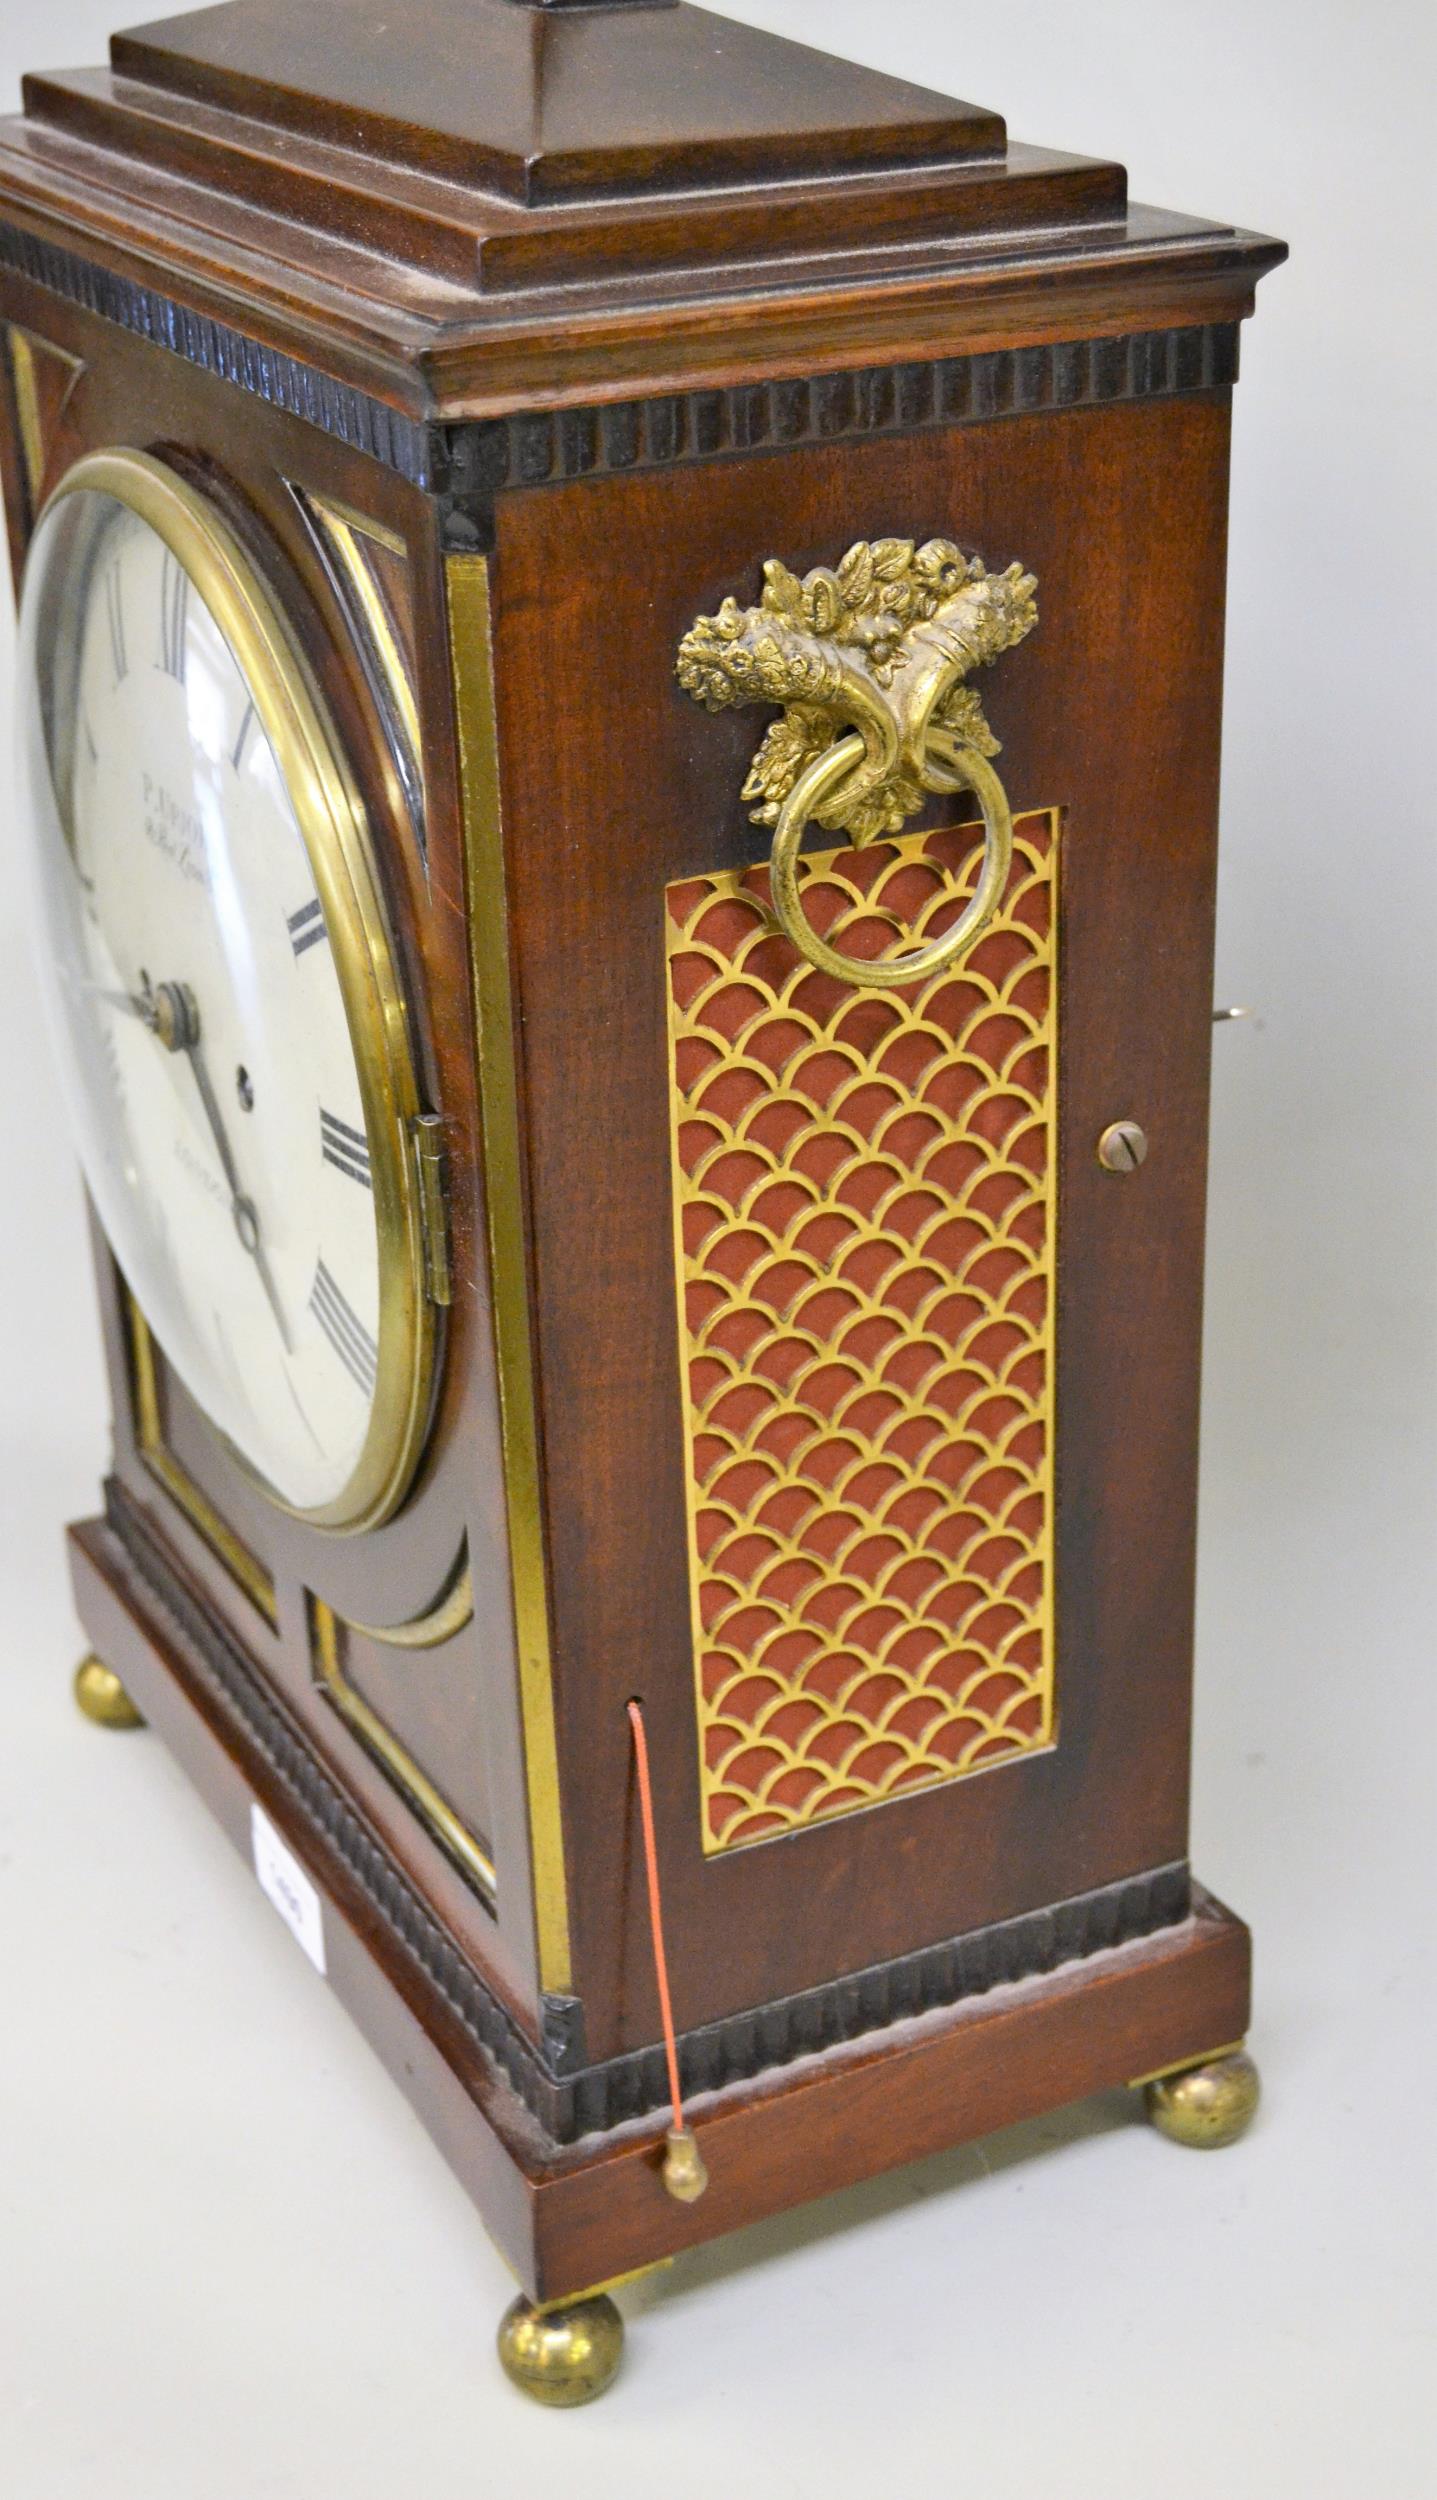 Regency mahogany bracket clock by P. Upjohn, Red Lion Street London, the rectangular case with - Image 2 of 3